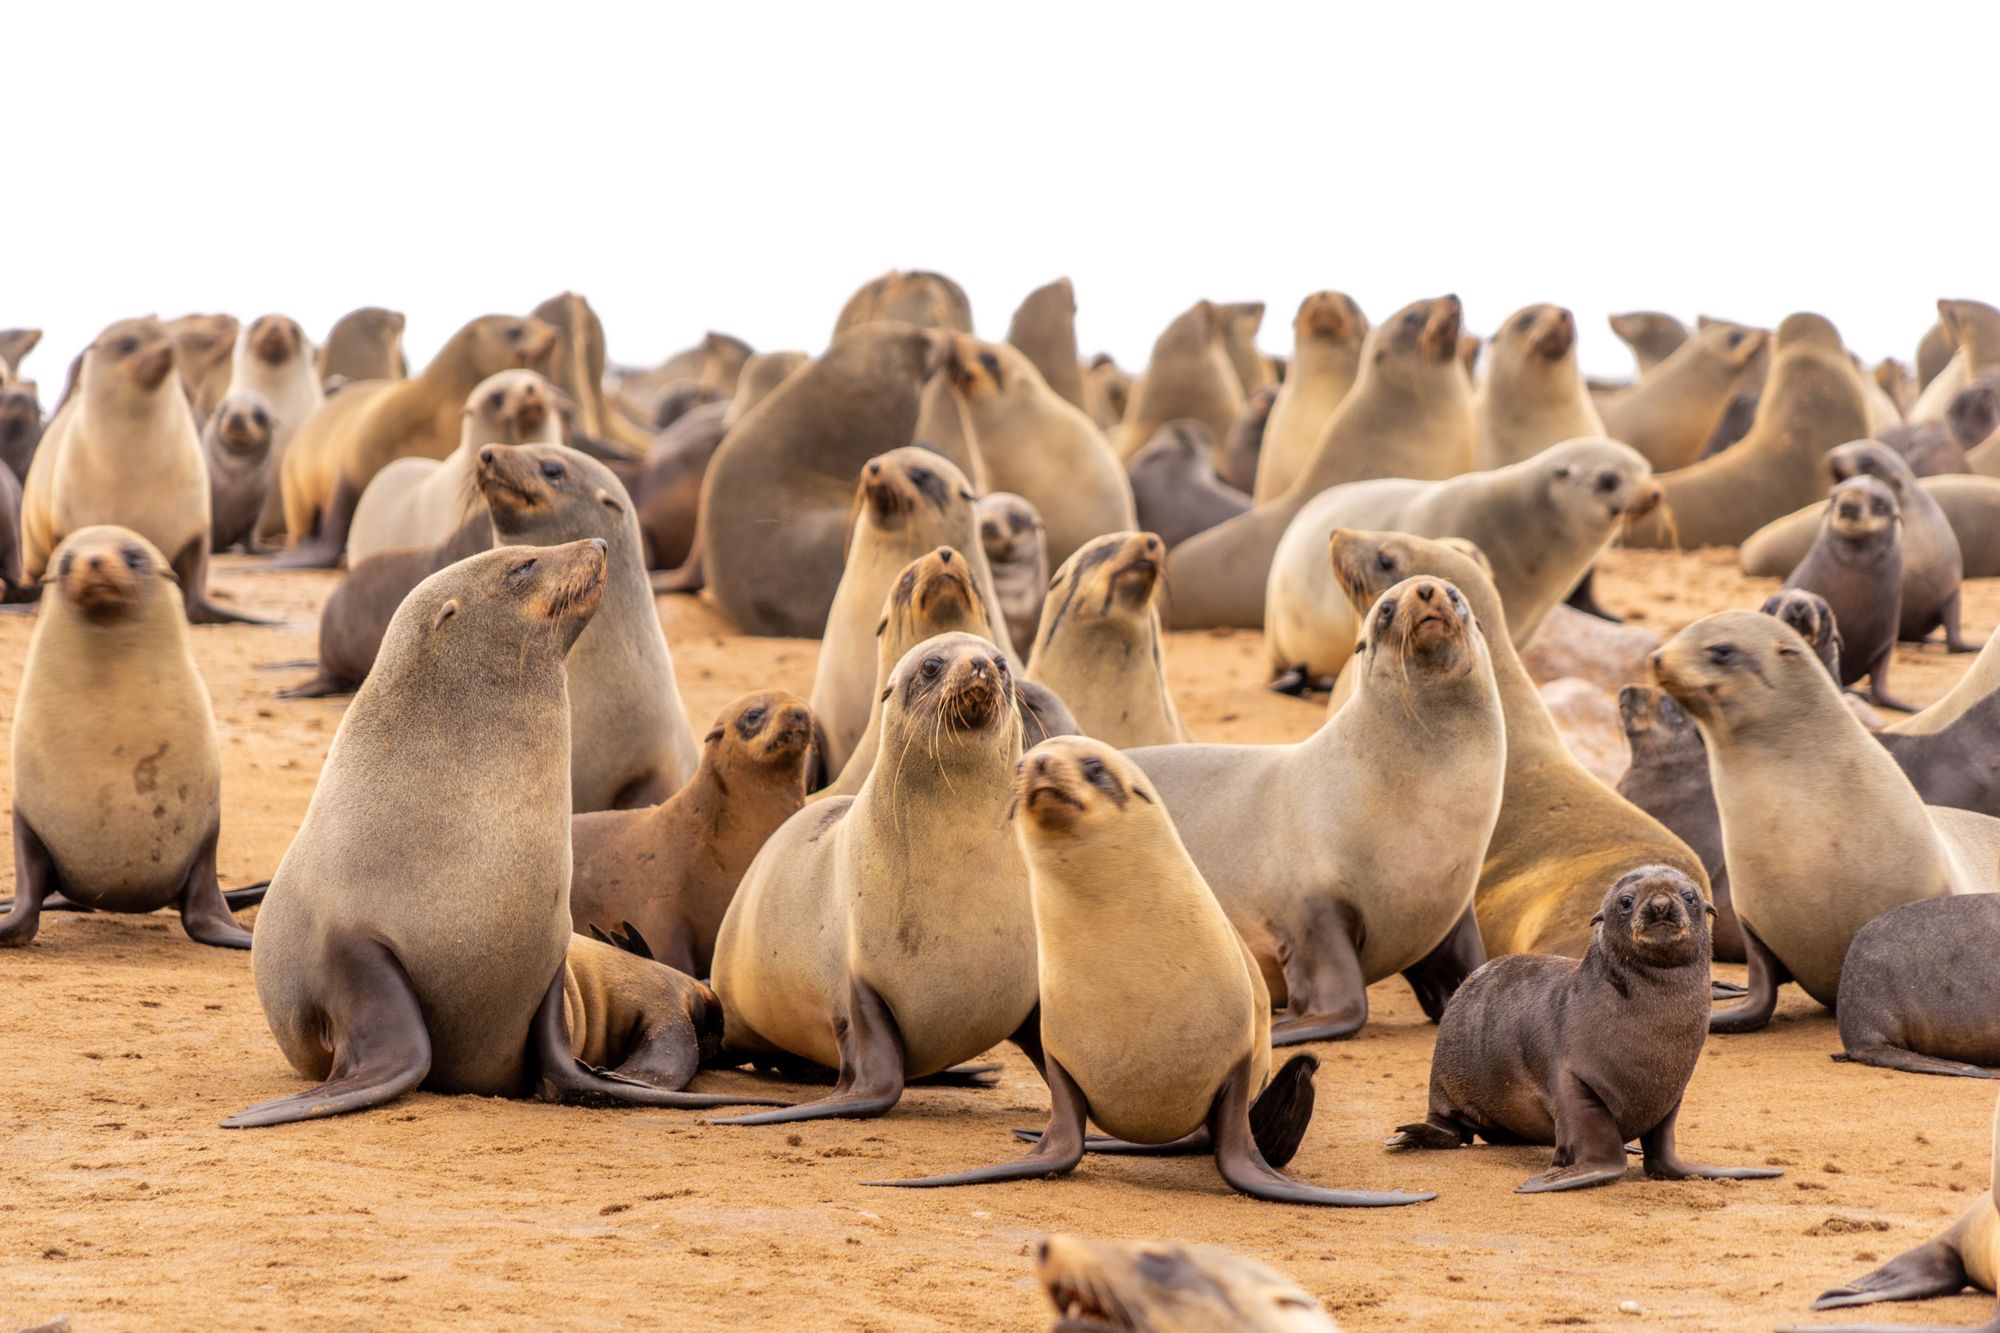 A seal colony, including baby seals, on the sands of Namibia. Photo: Getty